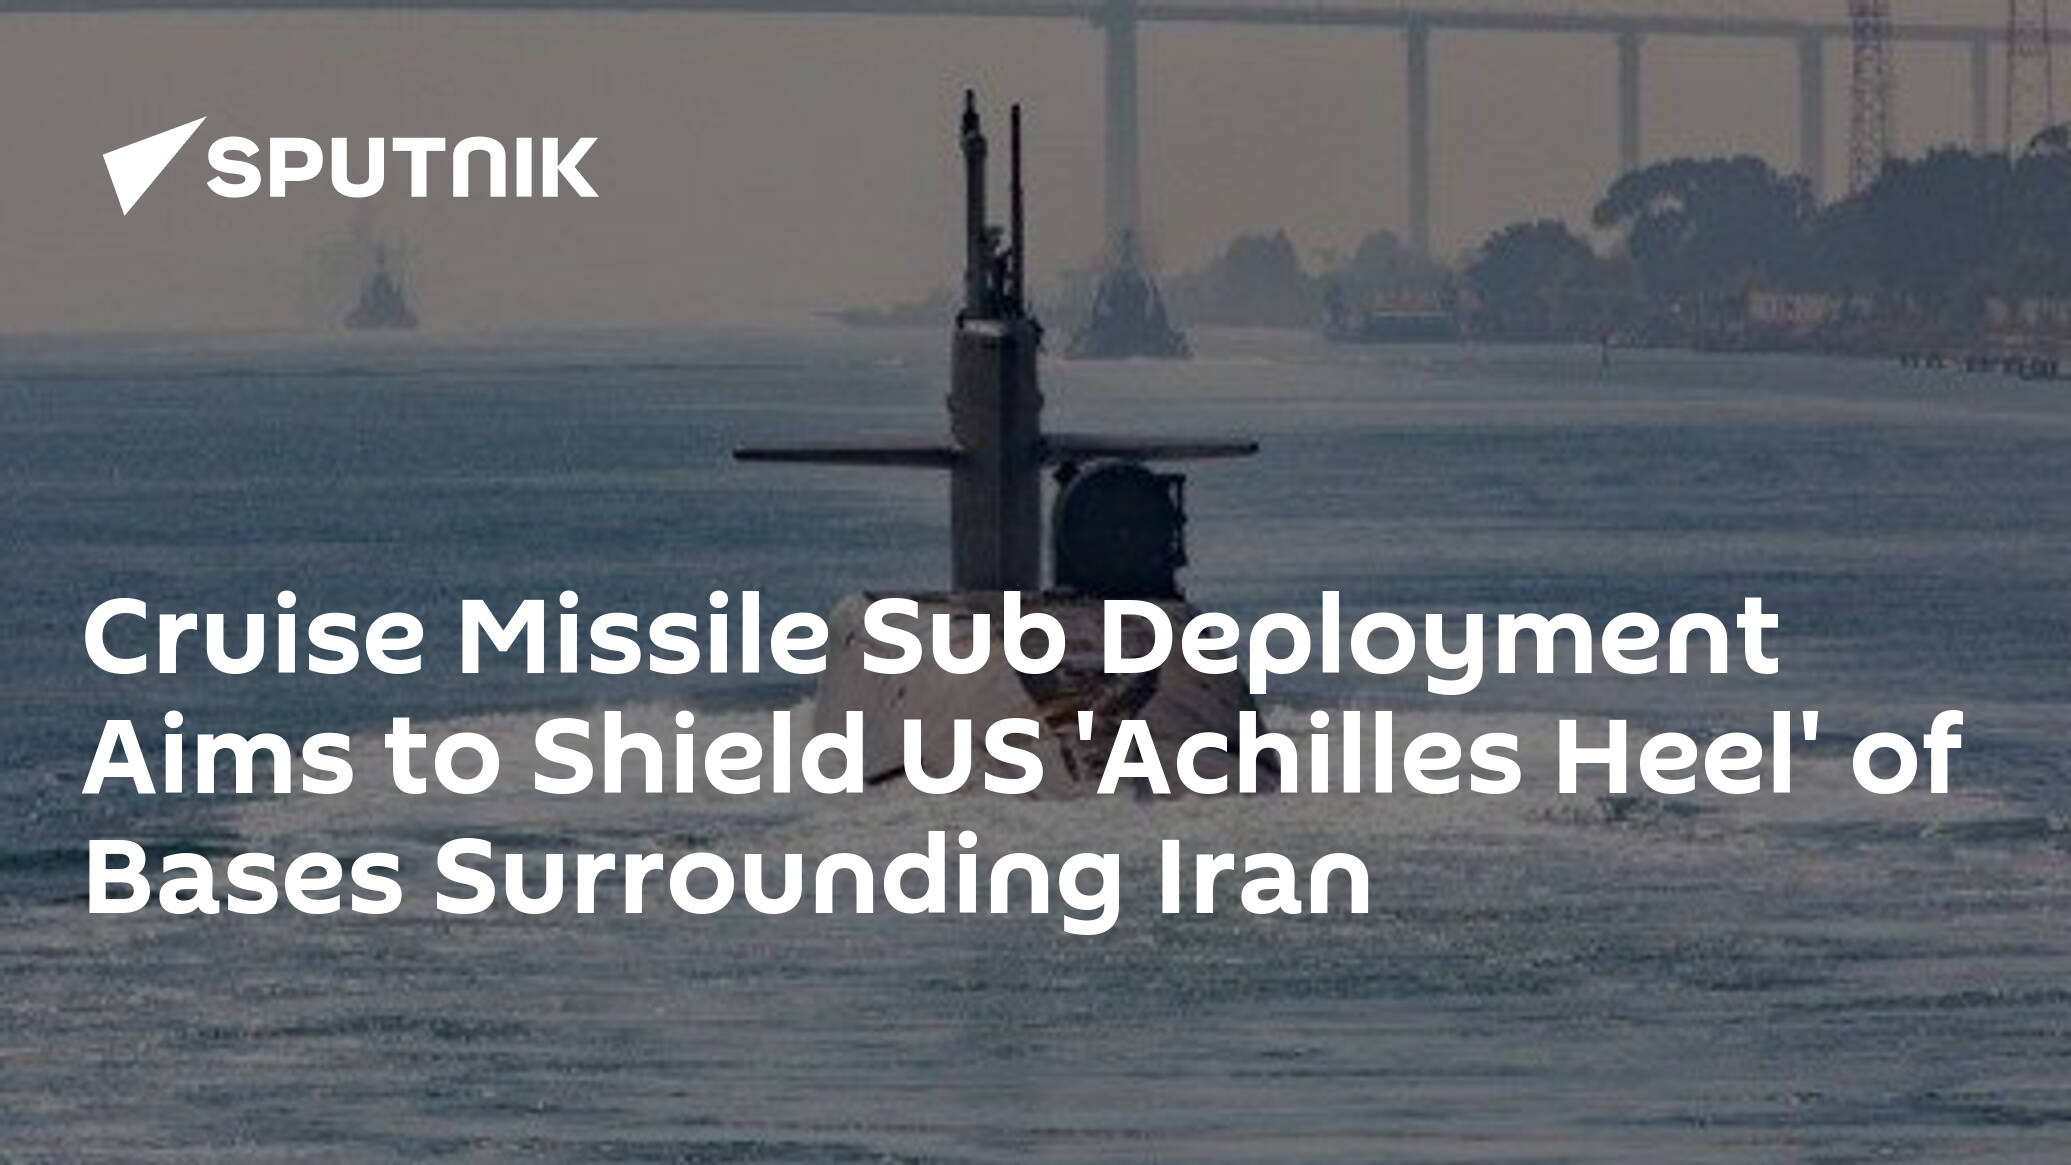 Cruise Missile Sub Deployment Aims to Shield US 'Achilles Heel' of Bases Surrounding Iran